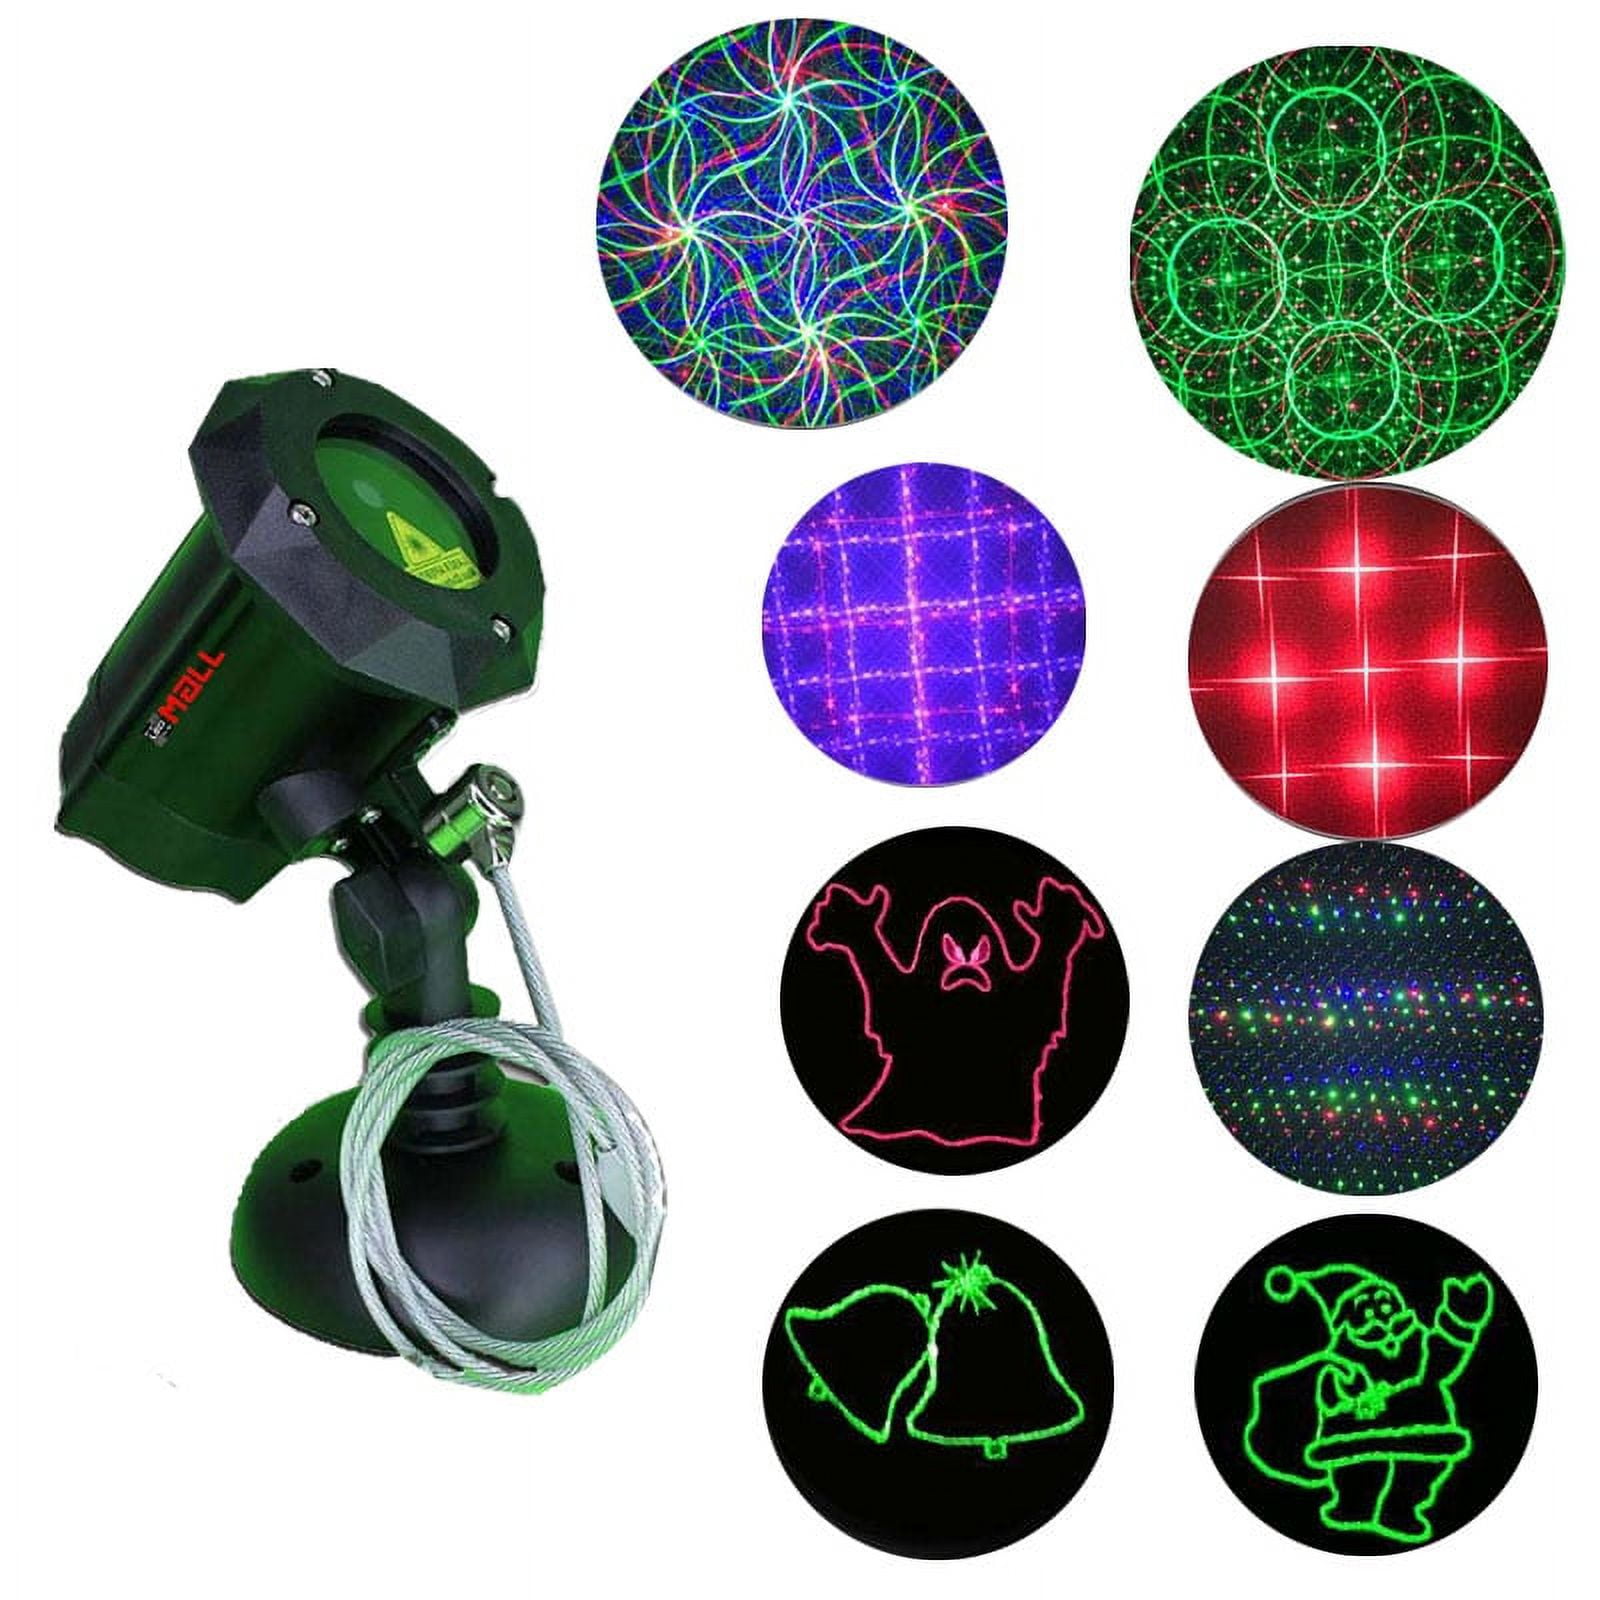 Moving Firefly Ledmall RGB Outdoor Garden Laser Christmas Lights with RF Remote Control and Security Lock